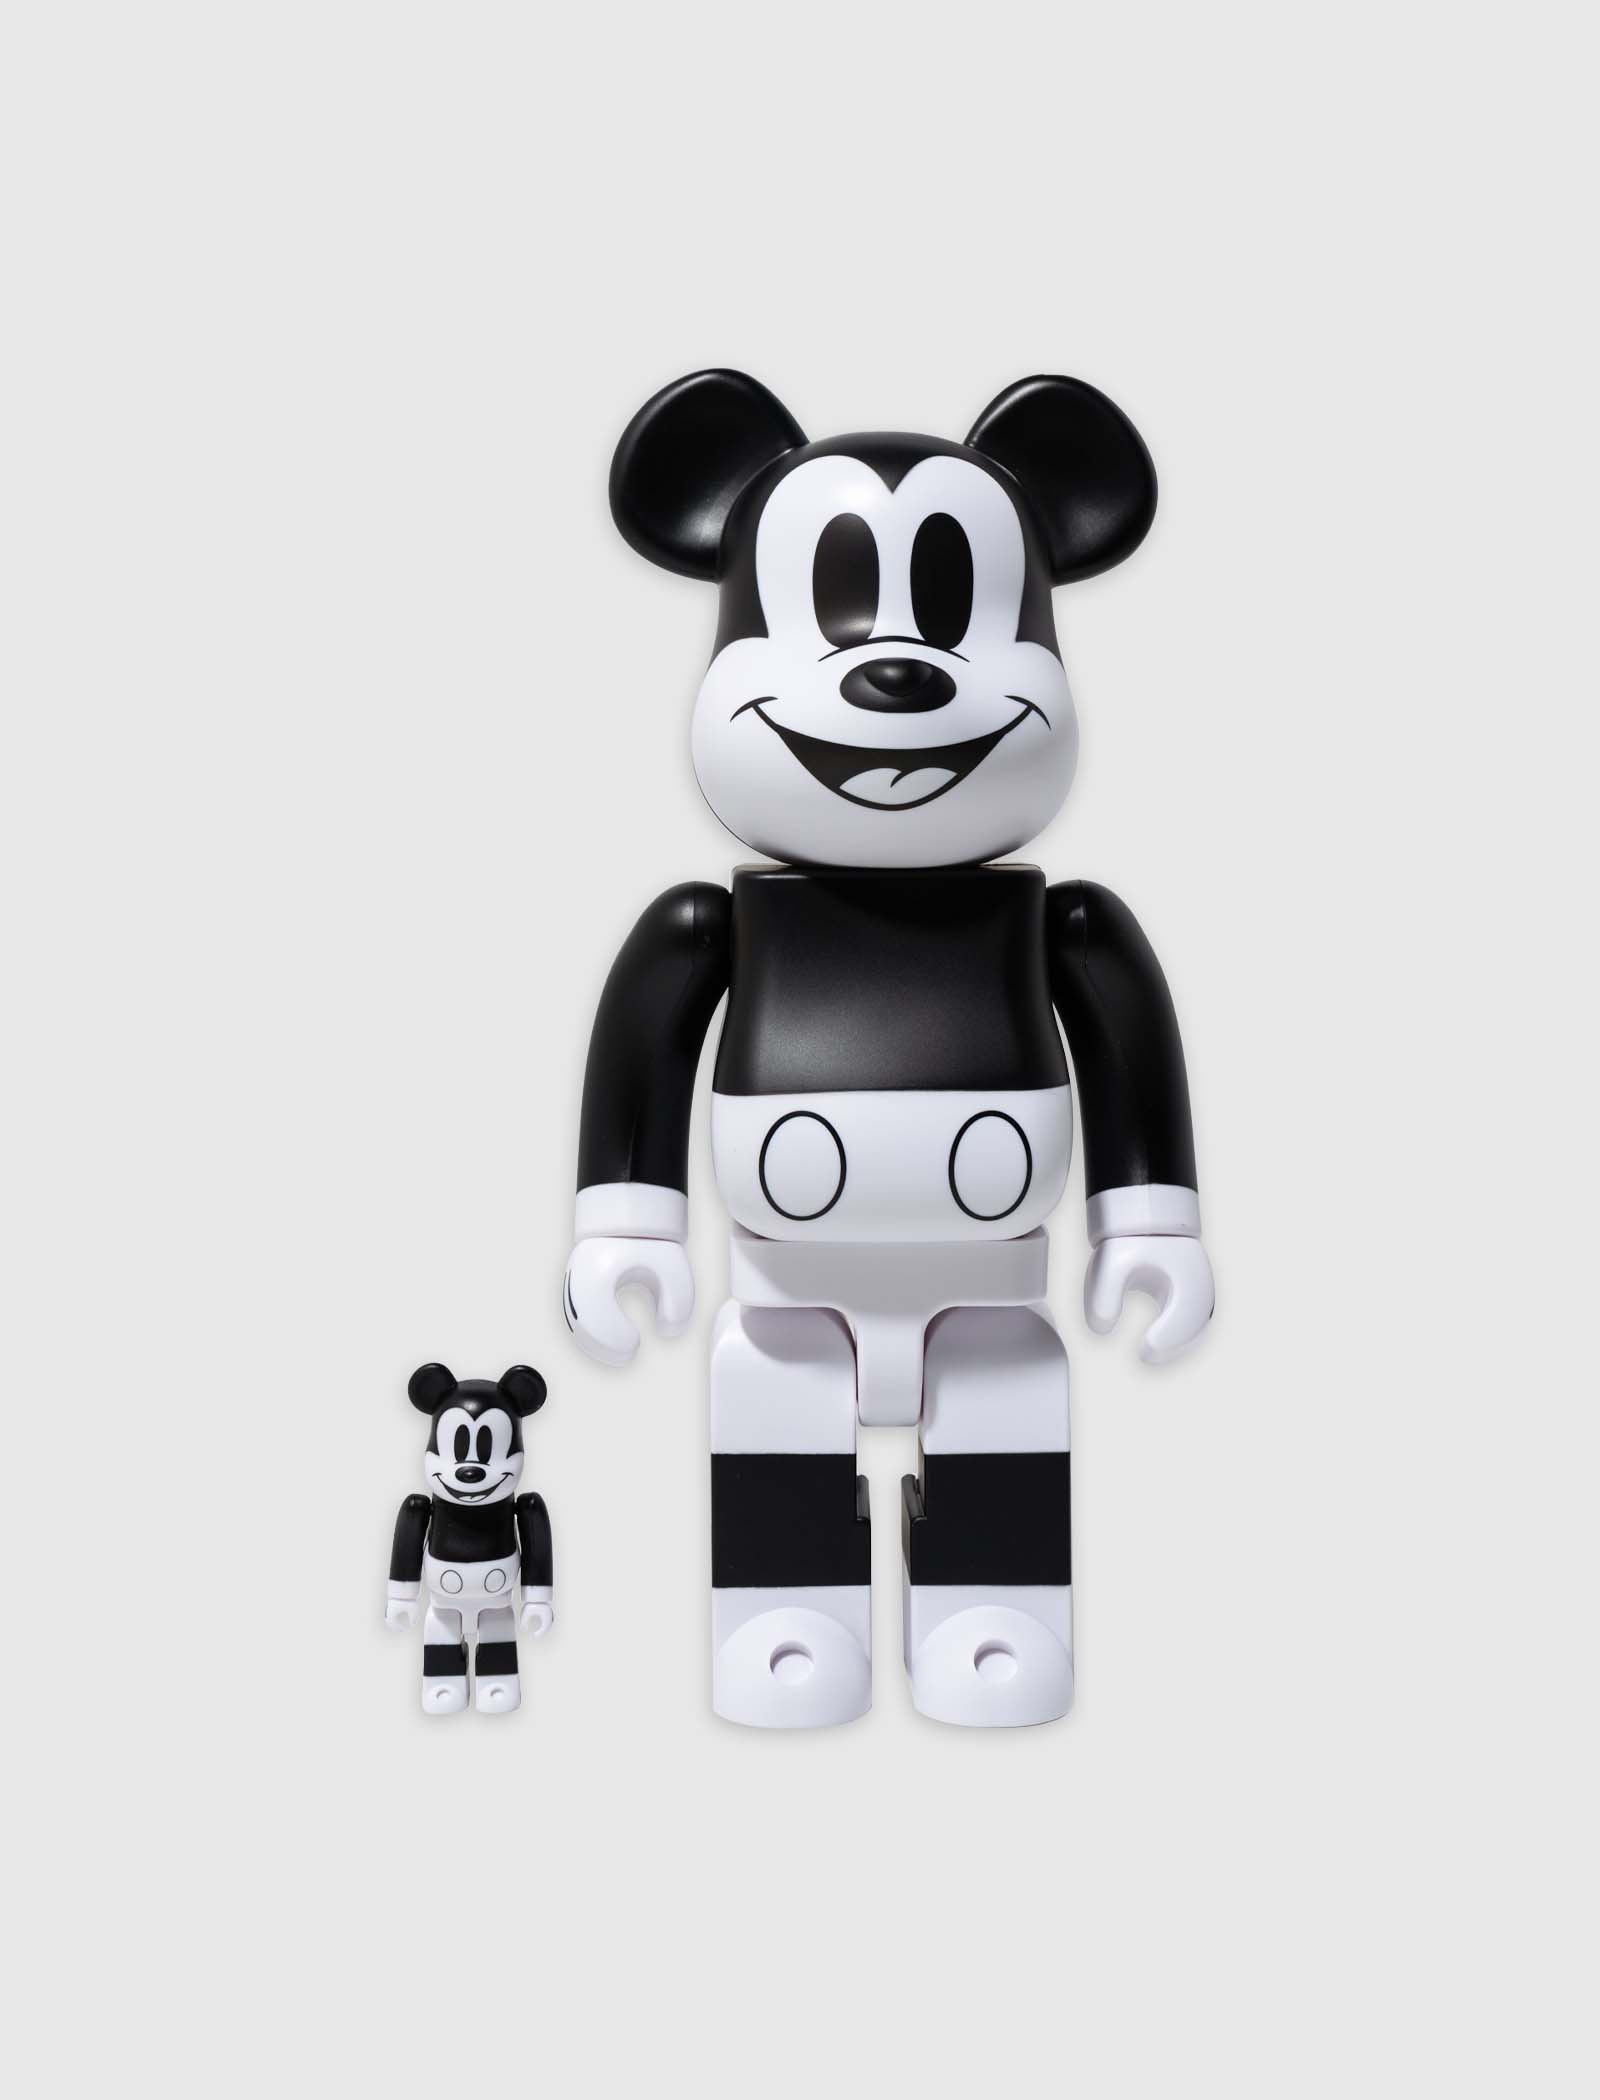 BE@RBRICK MICKEY MOUSE 2020 r&w 400% 100